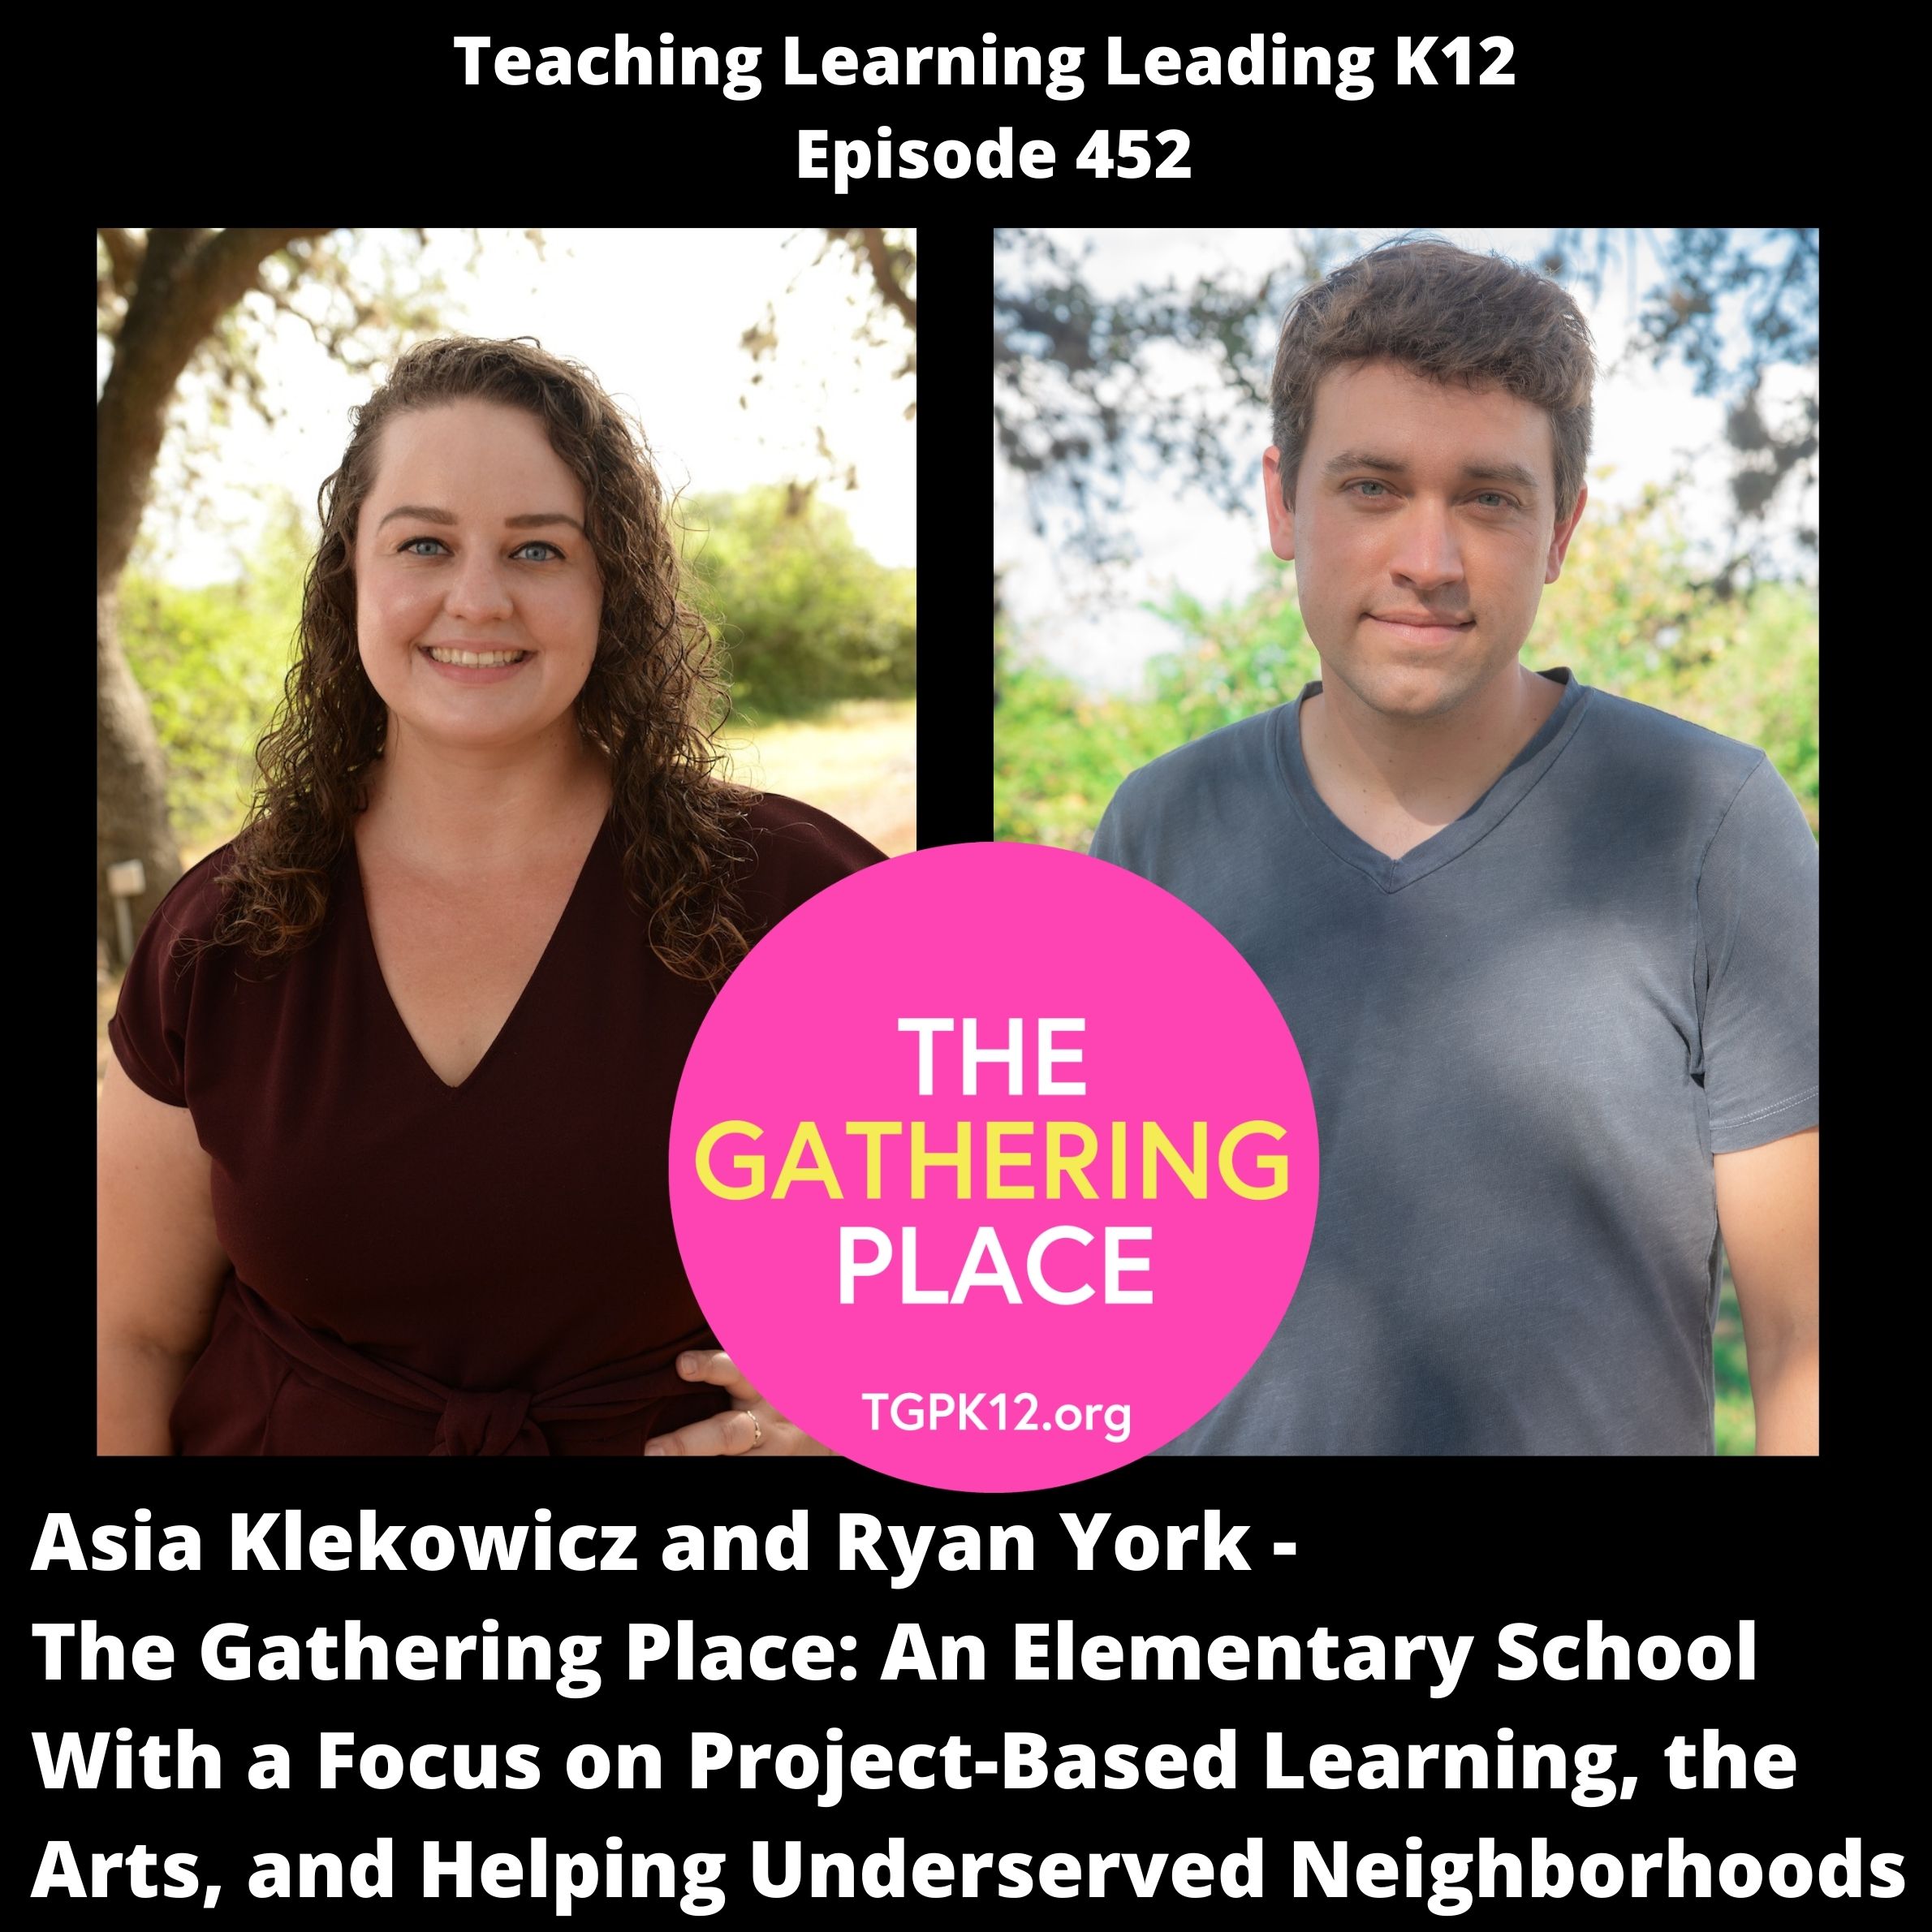 Asia Klekowicz and Ryan York - The Gathering Place: An Elementary School With a Focus on Project-Based Learning, the Arts, and Helping Underserved Neighborhoods - 452 Image